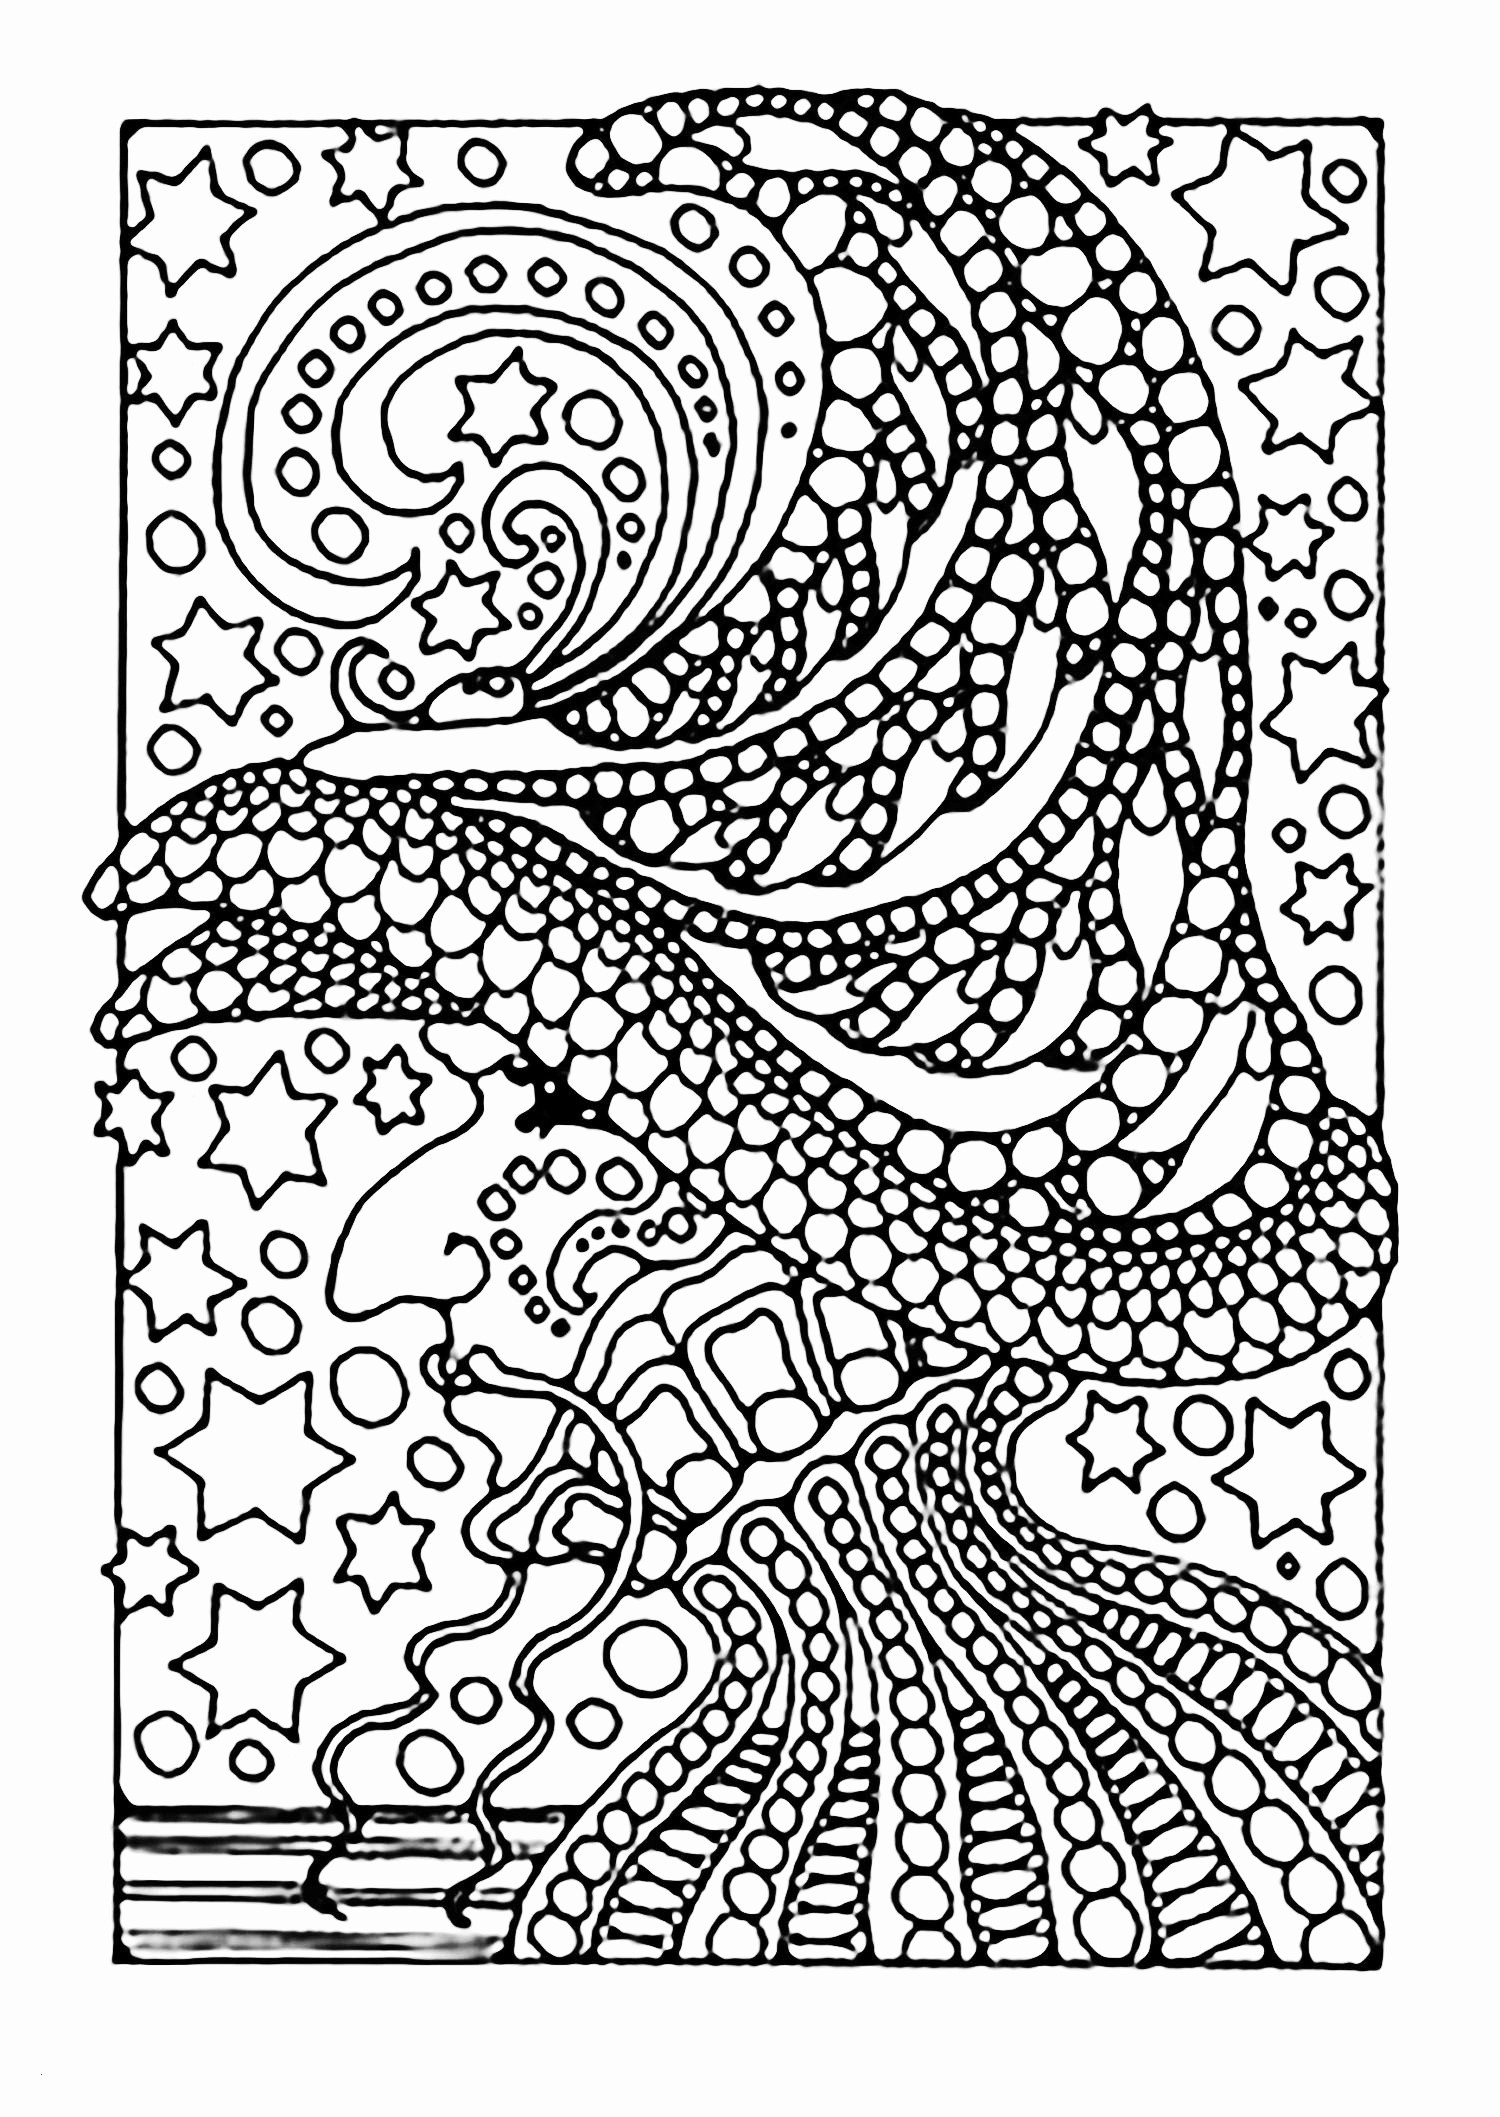 Free Dog Coloring Pages New Cool Printable Coloring Pages Fresh Cool Od Dog Coloring Pages Free